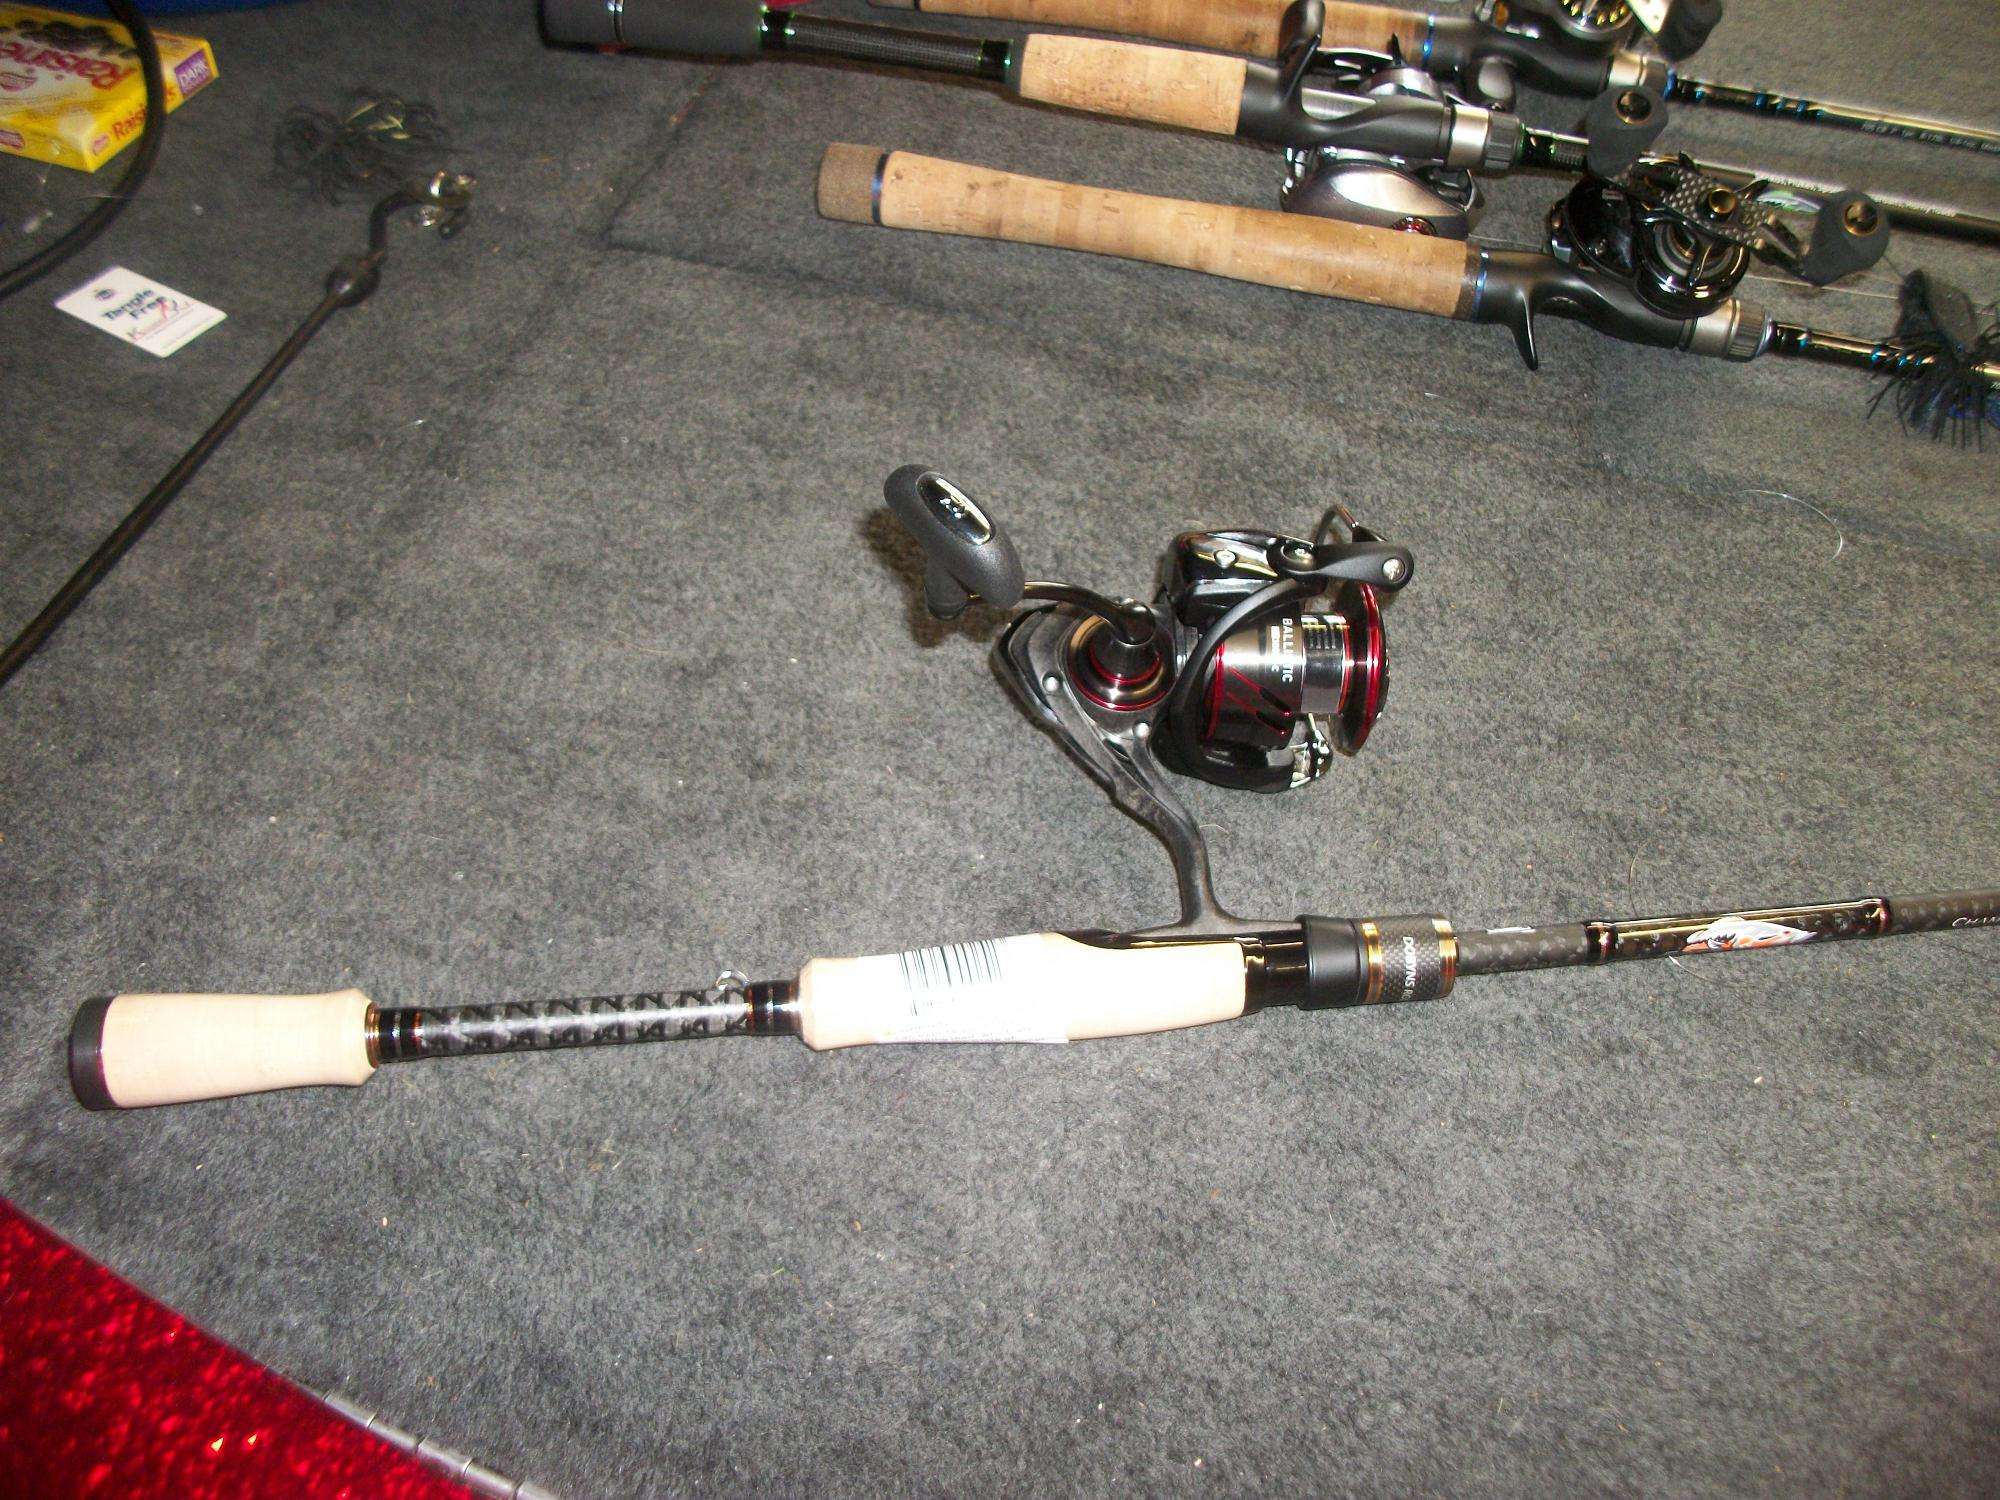 Finesse Rods From Kistler Fishing Rods